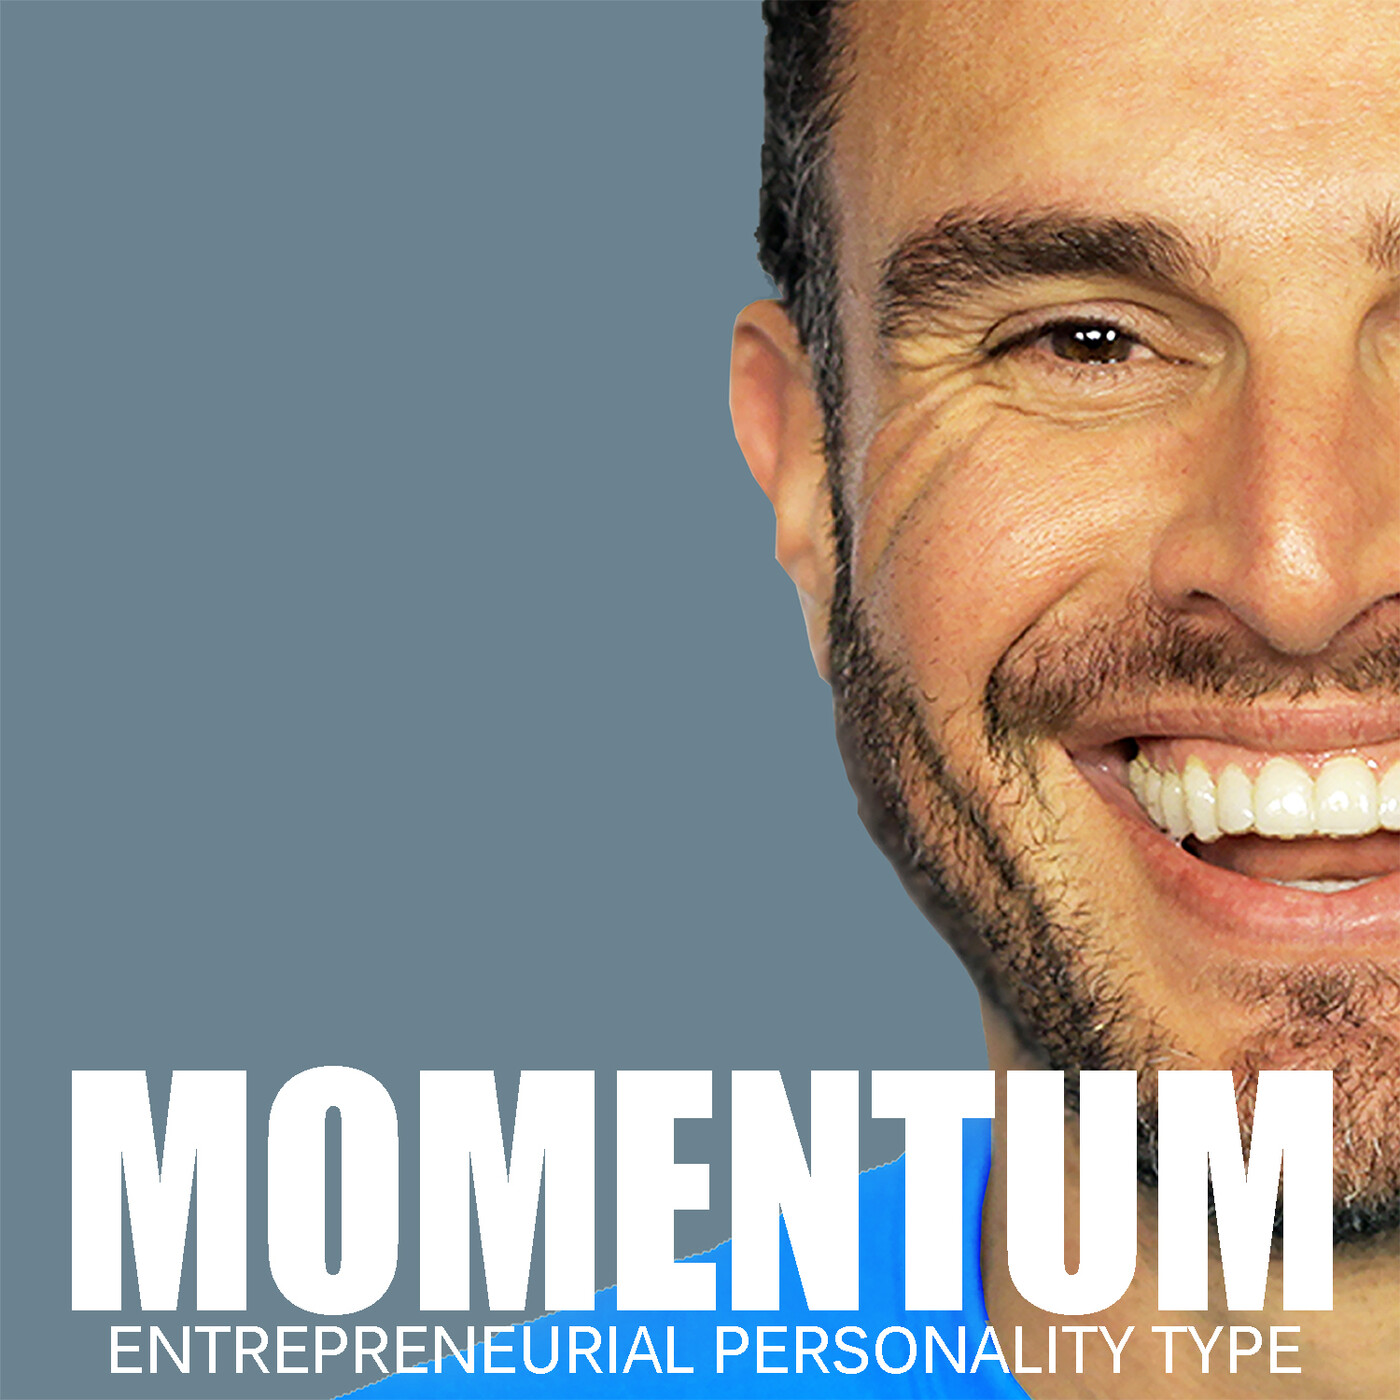 the-primal-walk-a-simple-habit-that-changes-everything-entrepreneurial-personality-type-ept